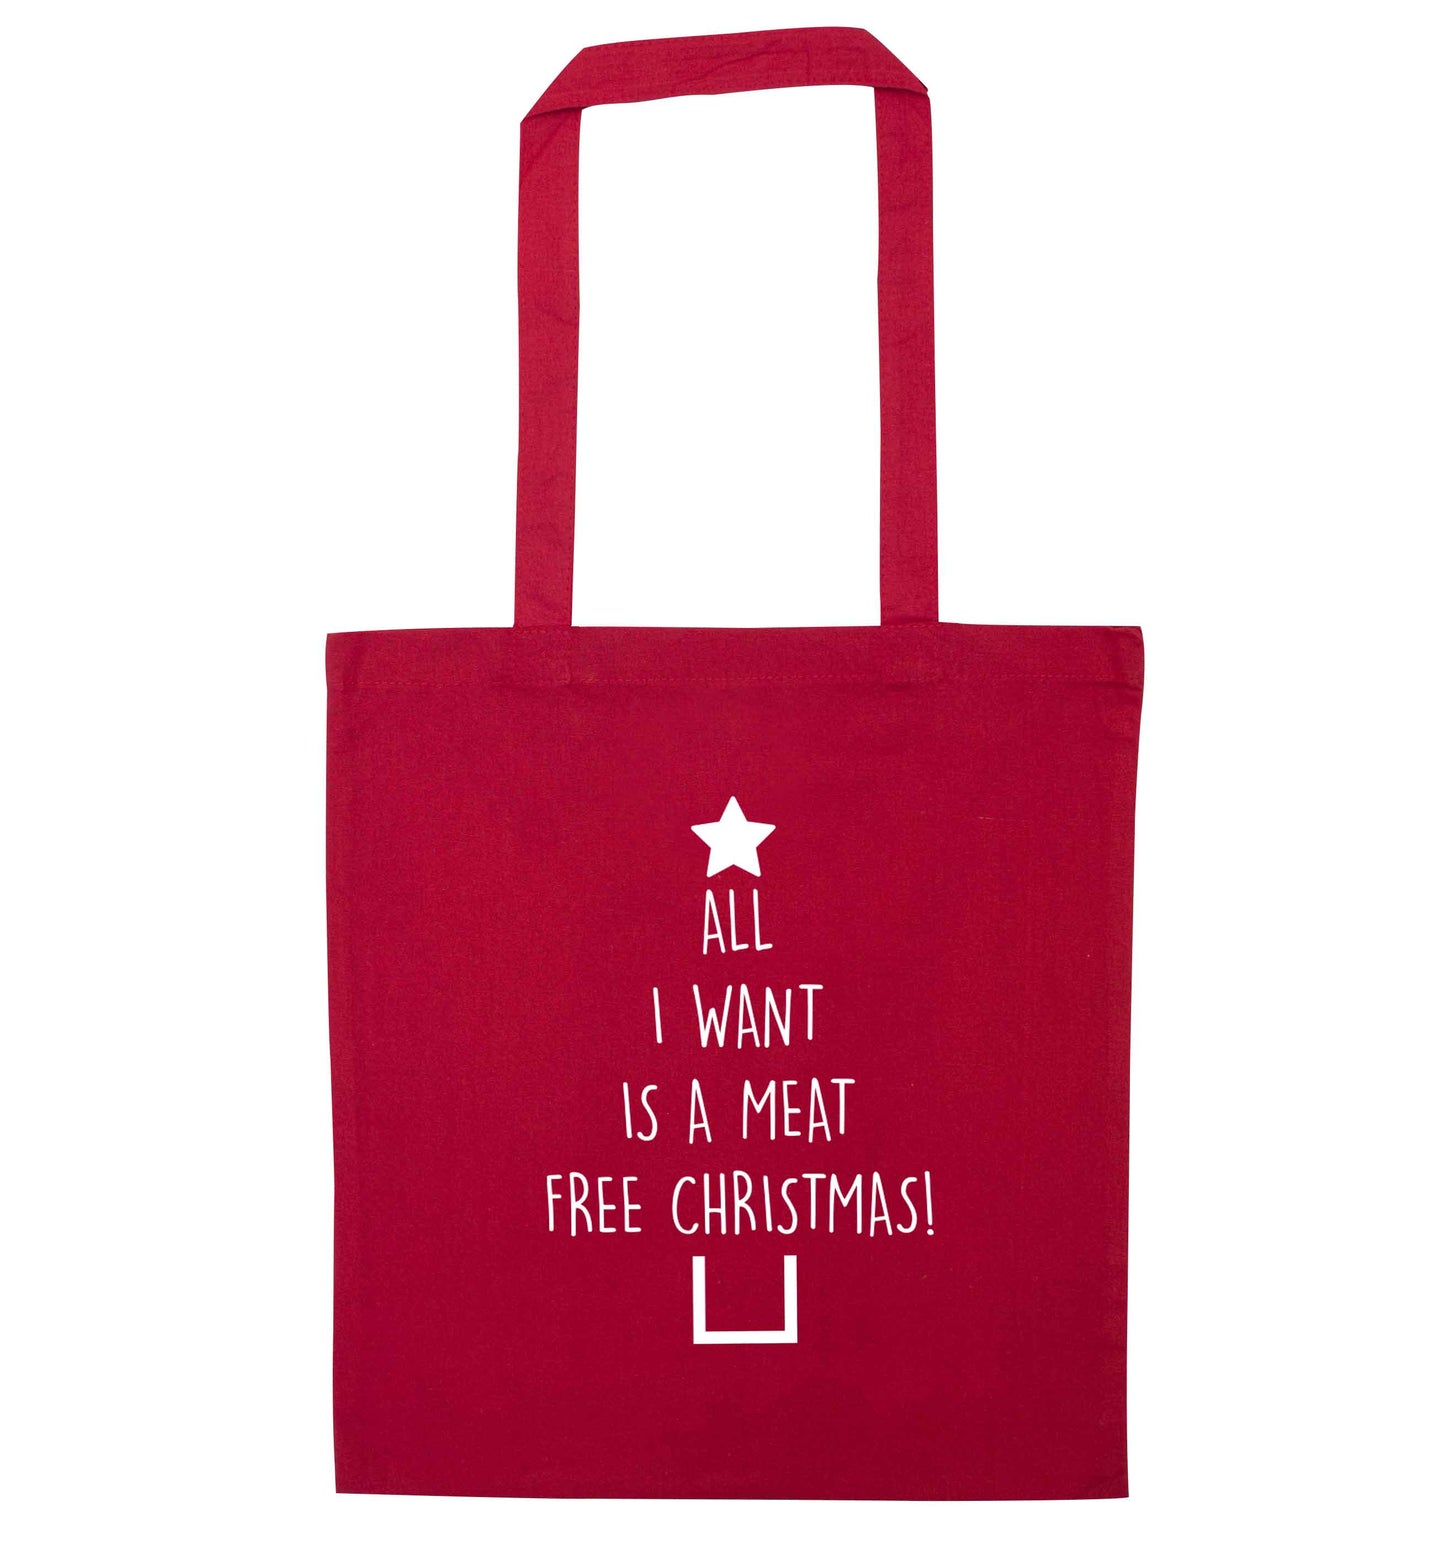 All I want is a meat free Christmas red tote bag